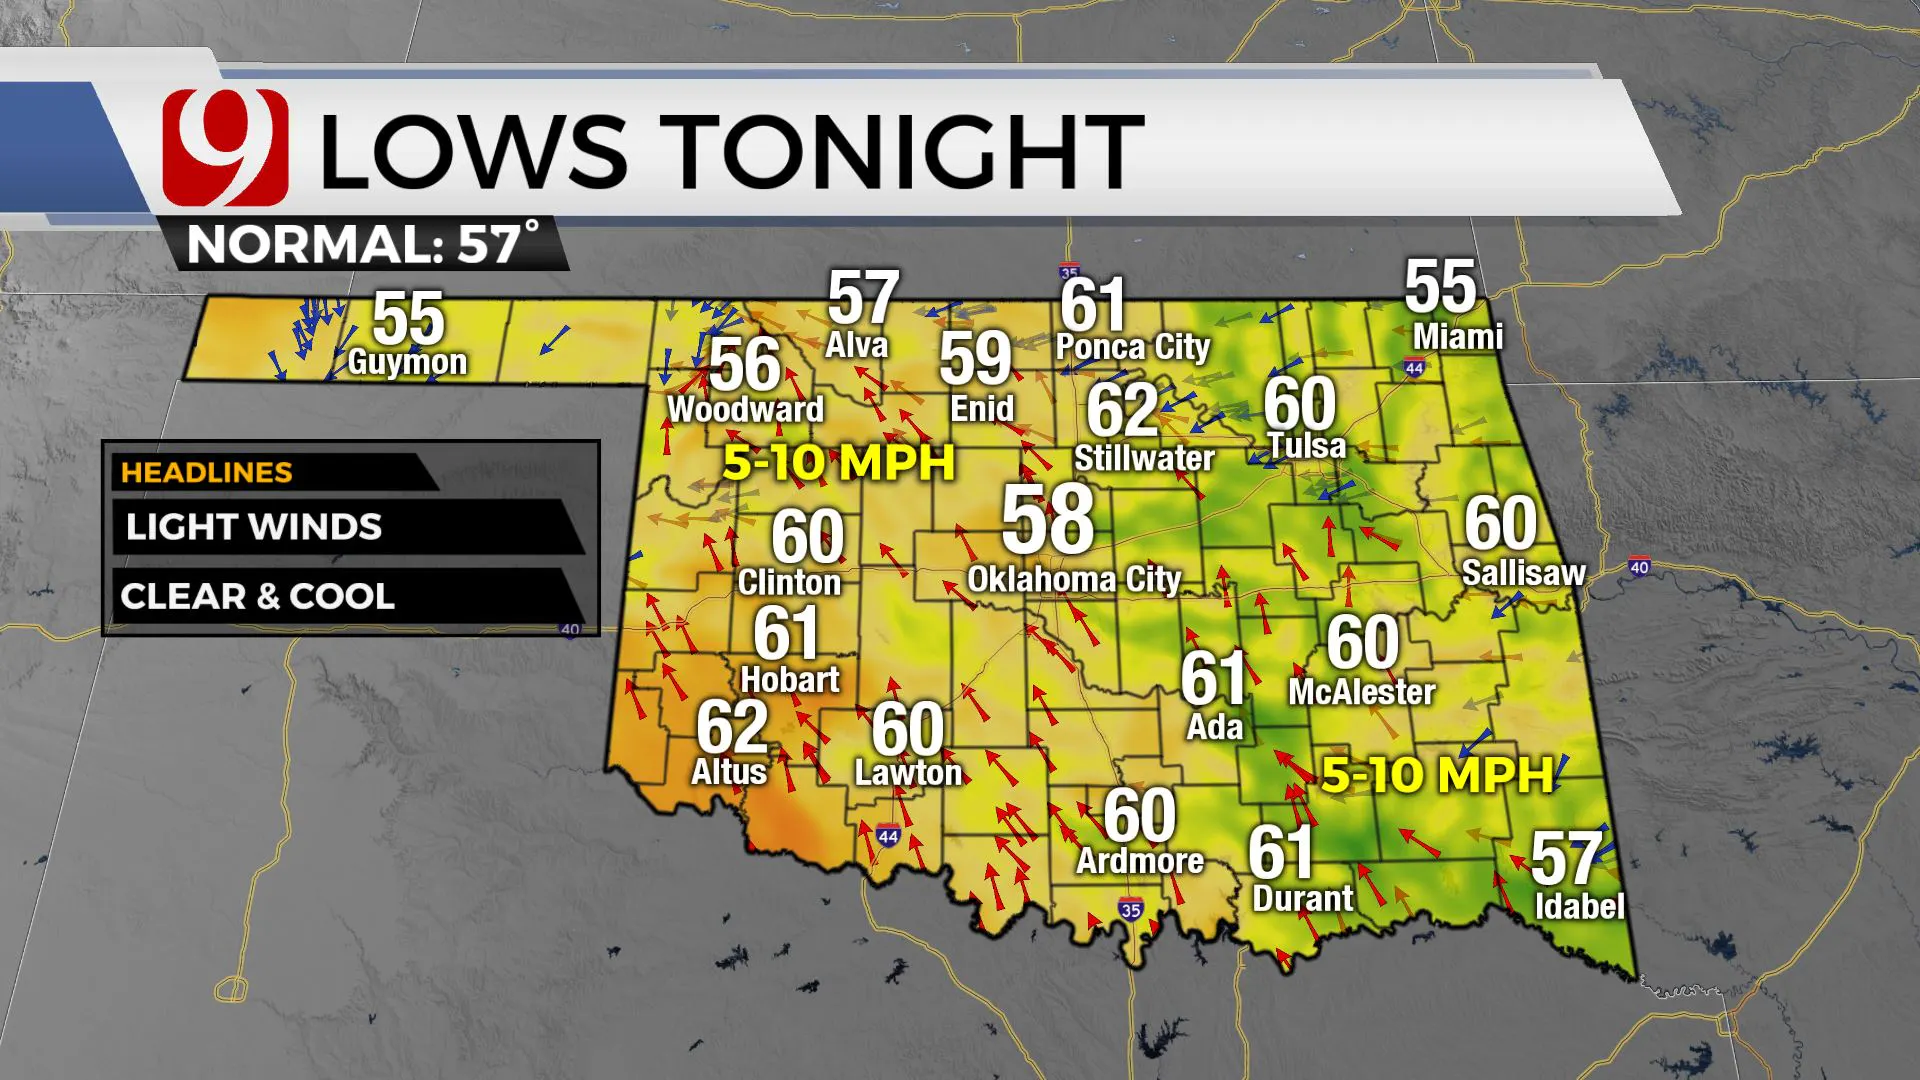 Lows tonight across the state.